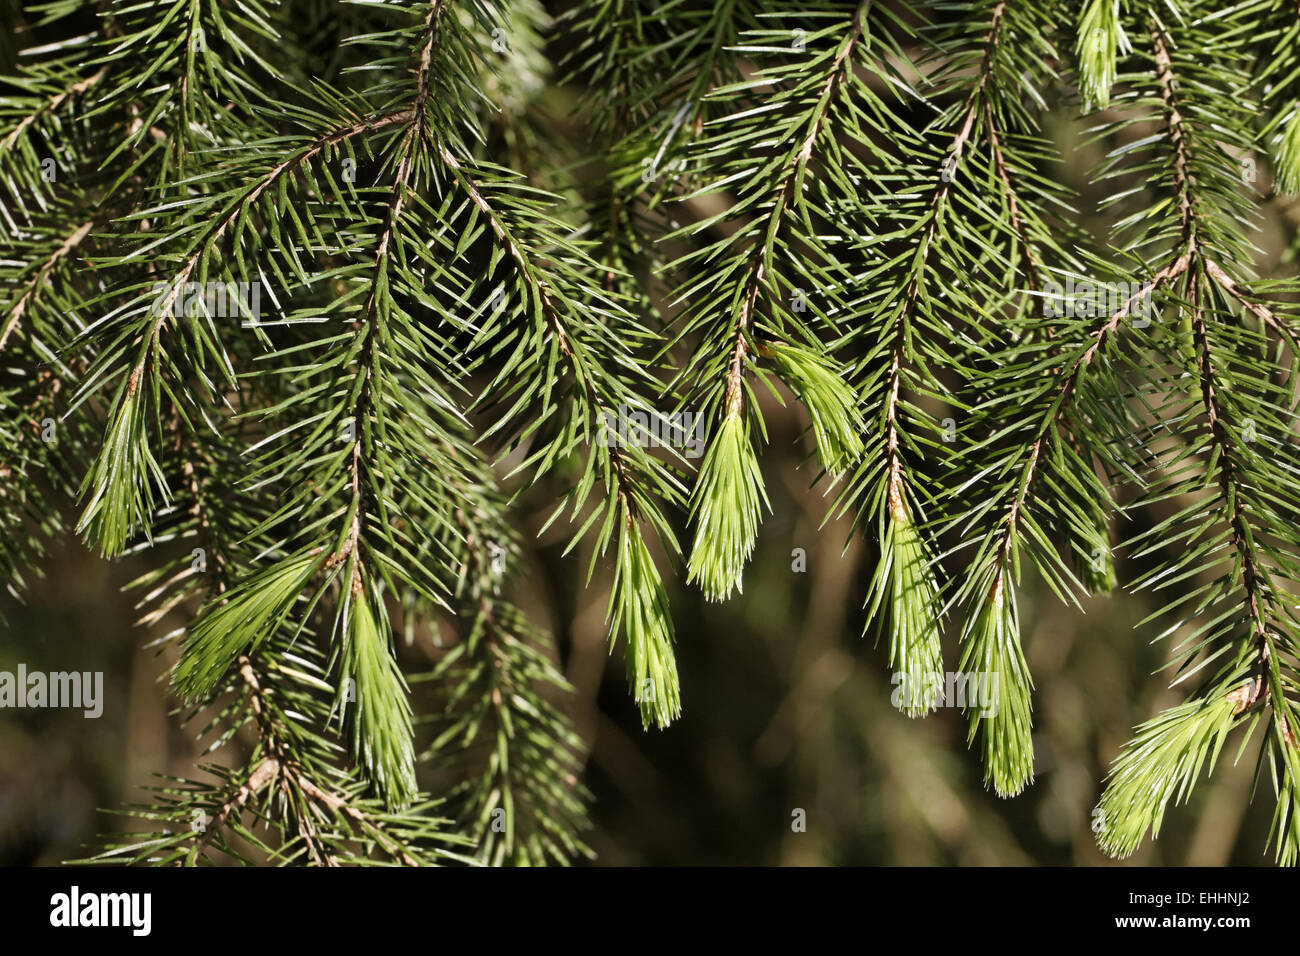 Picea sitchensis, Sitka spruce Stock Photo